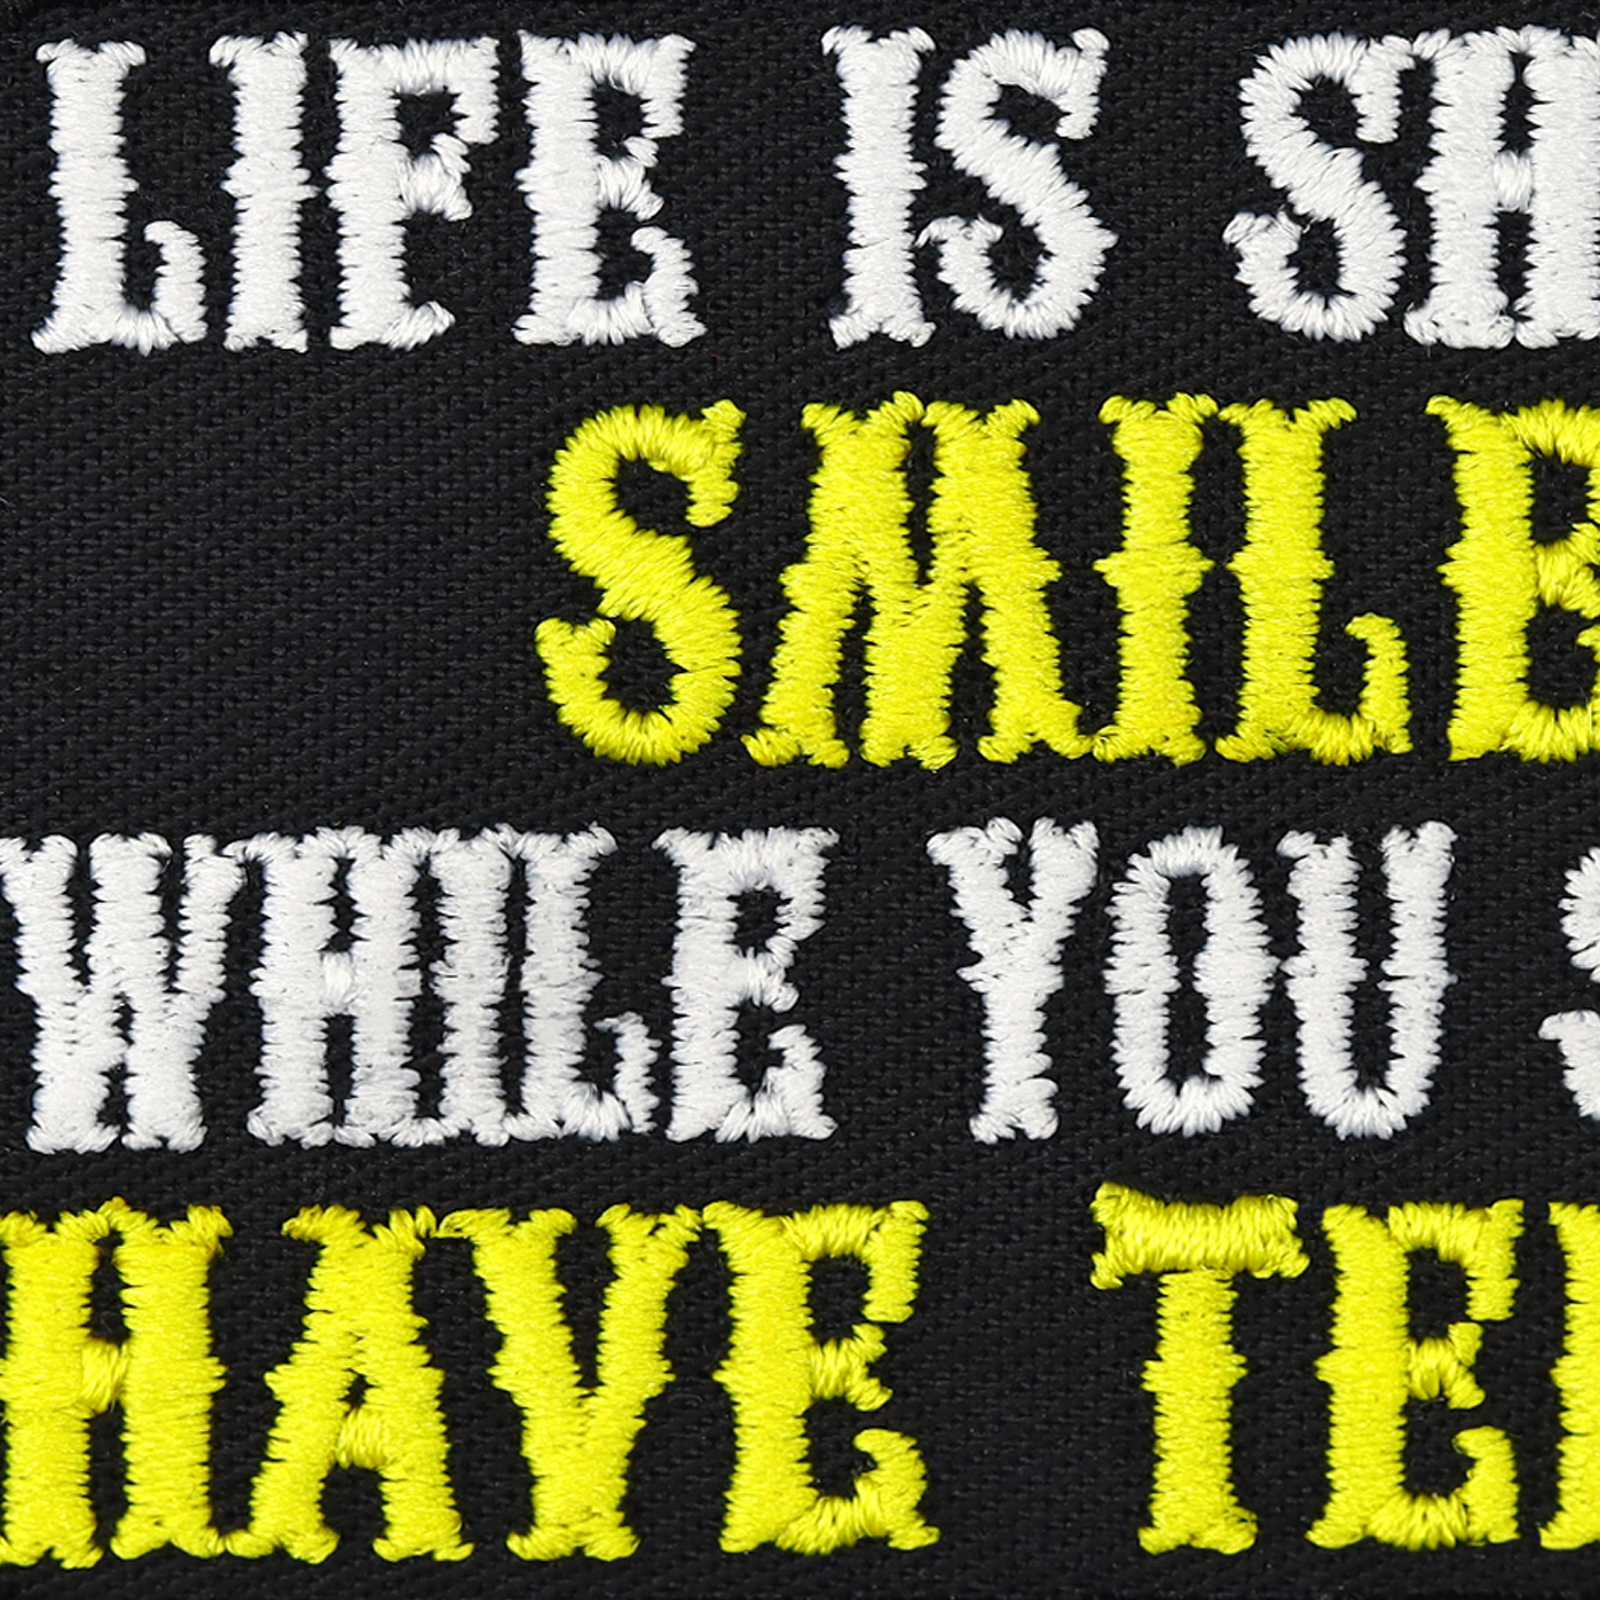 Life is short - Smile while you still have teeth. - Patch